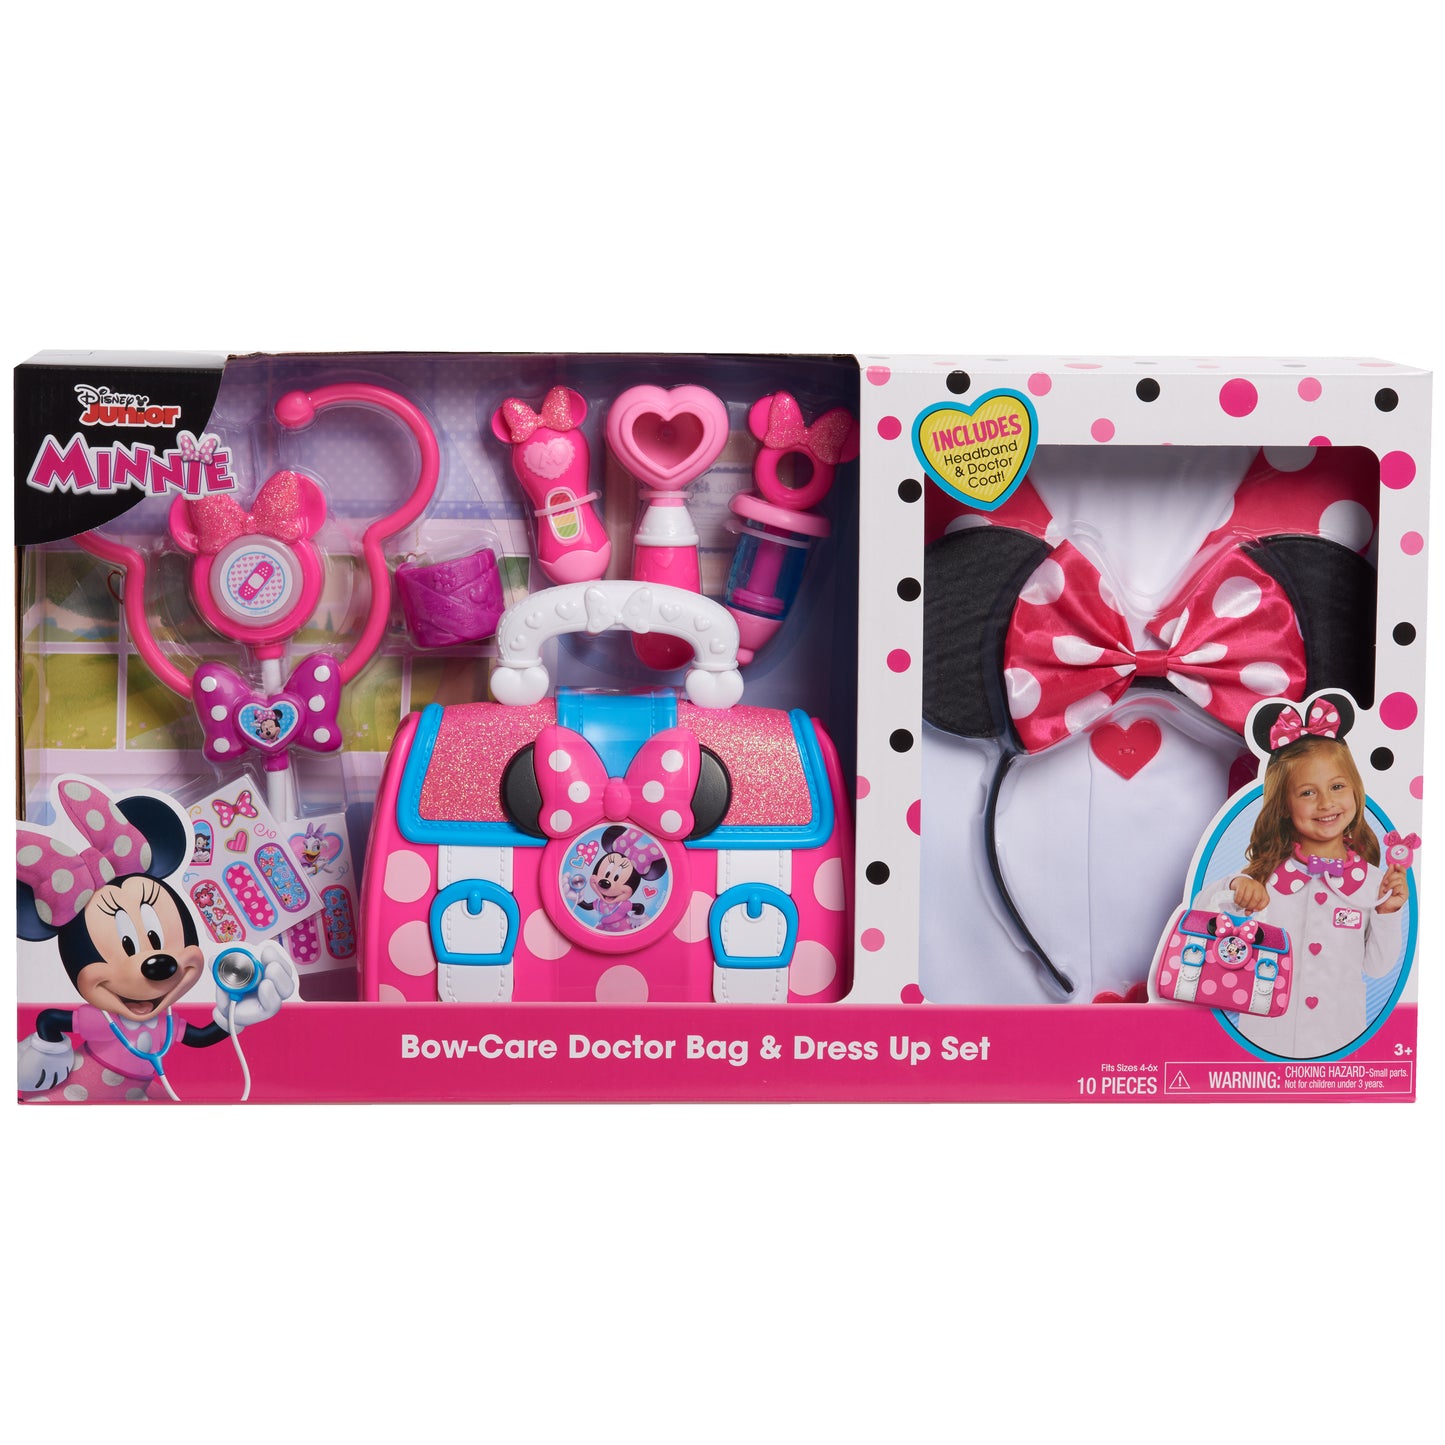 Disney Junior Minnie Mouse Bow-Care Doctor Bag and Dress Up Set, 10 piece pretend play doctor set, Ages 3 +